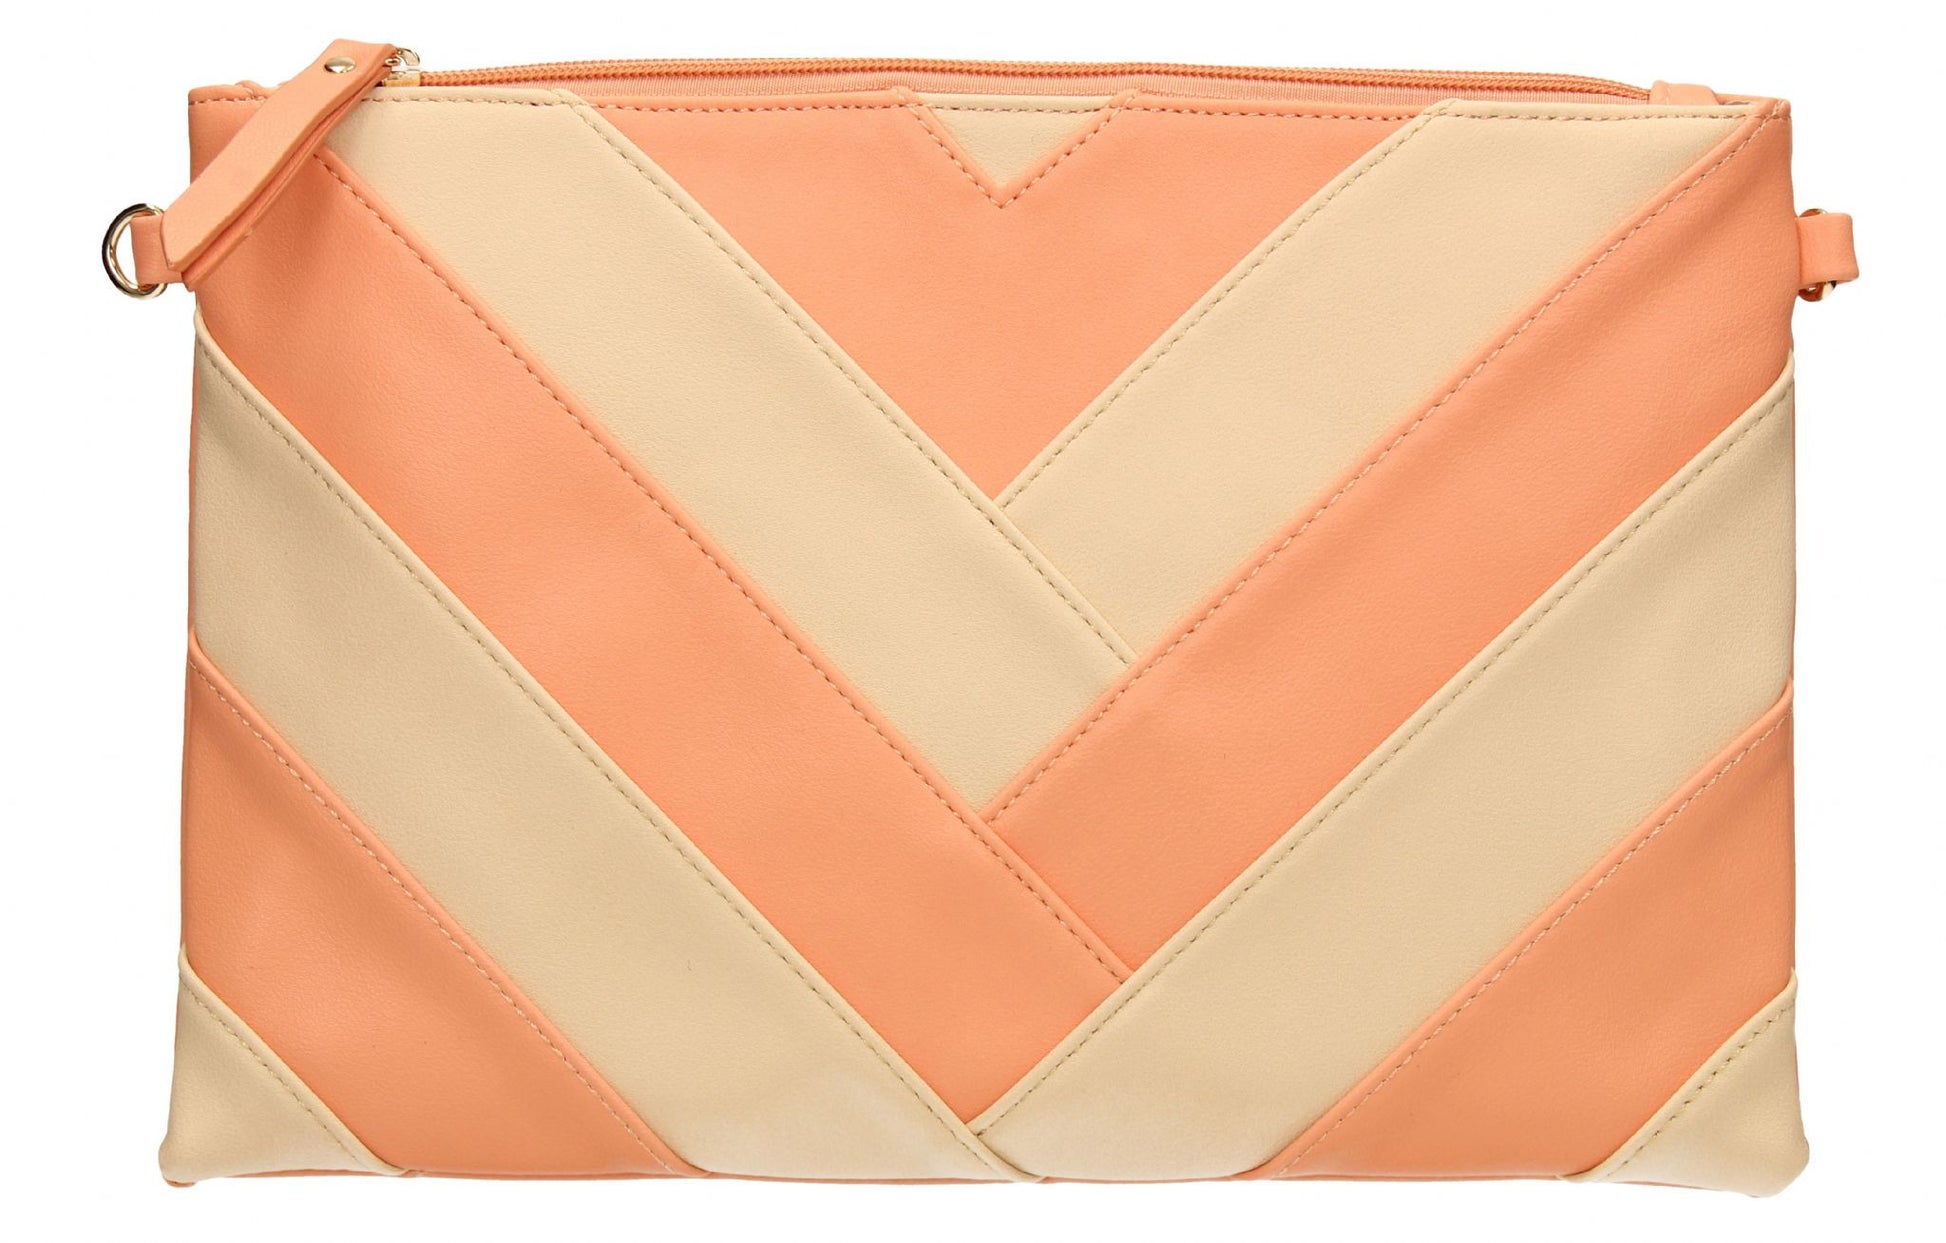 SWANKYSWANS Venice Stripes Clutch Bag Pink Cute Cheap Clutch Bag For Weddings School and Work